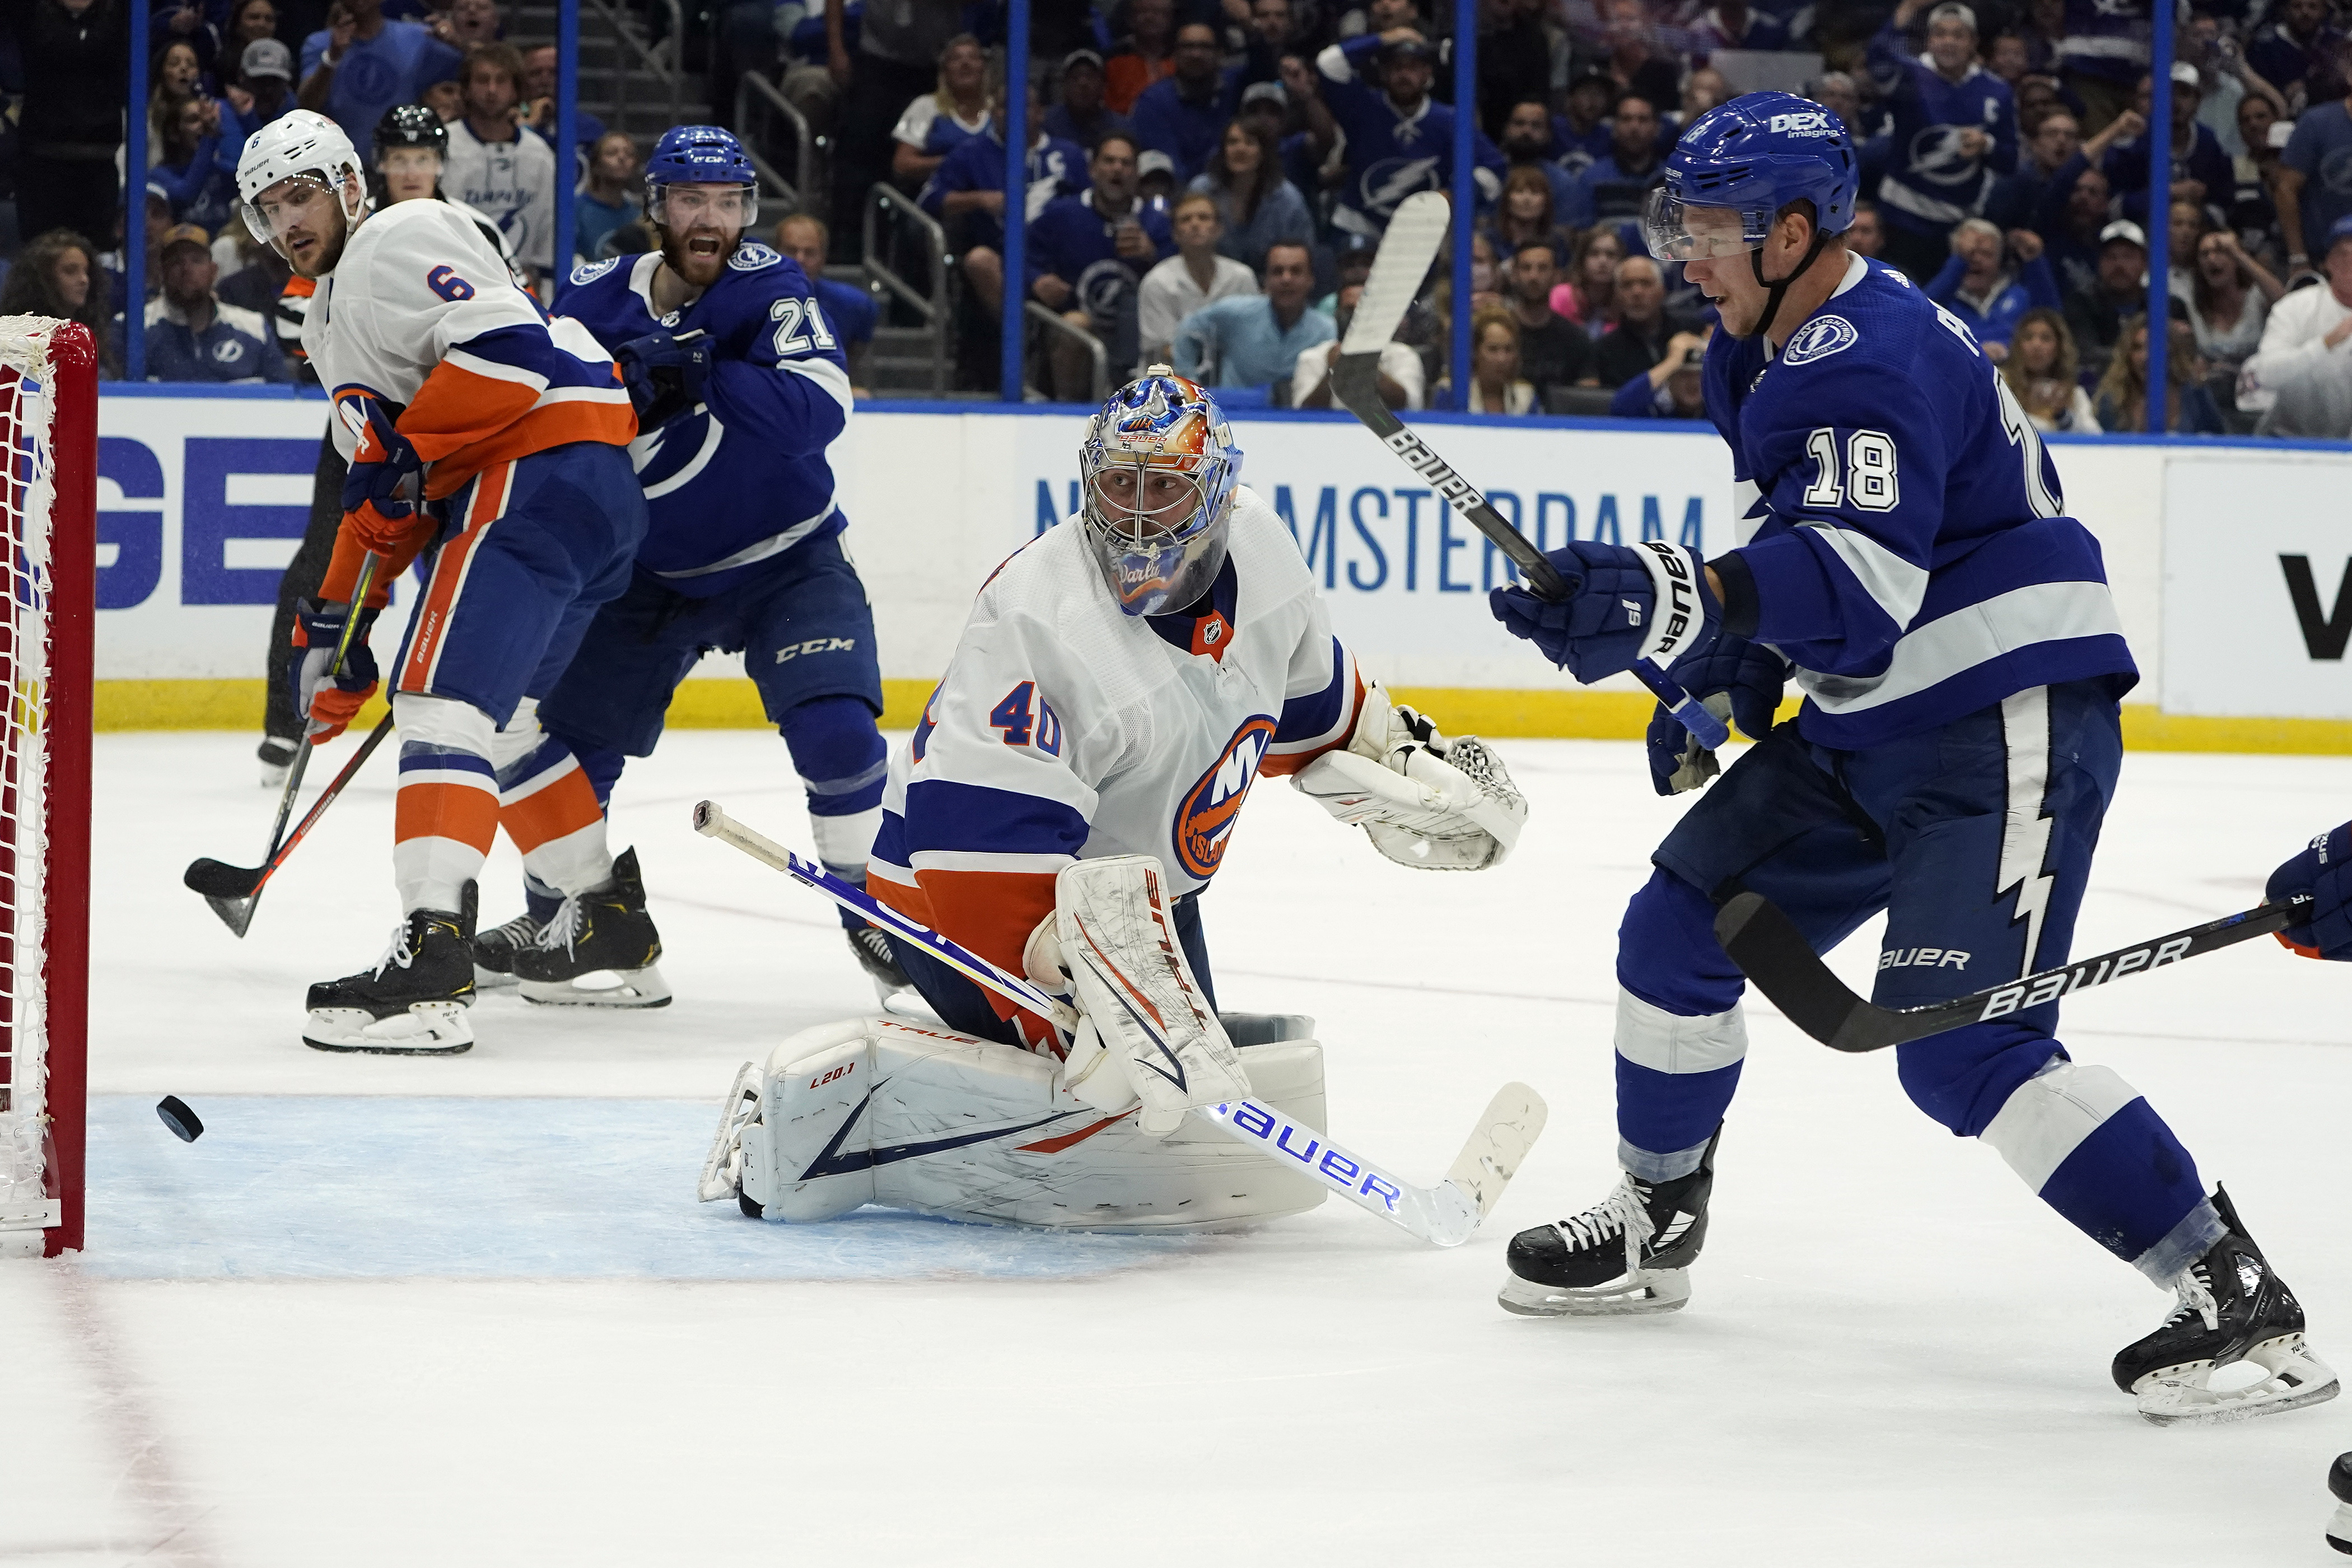 Lightning take first lead in series as Palat slots home goal